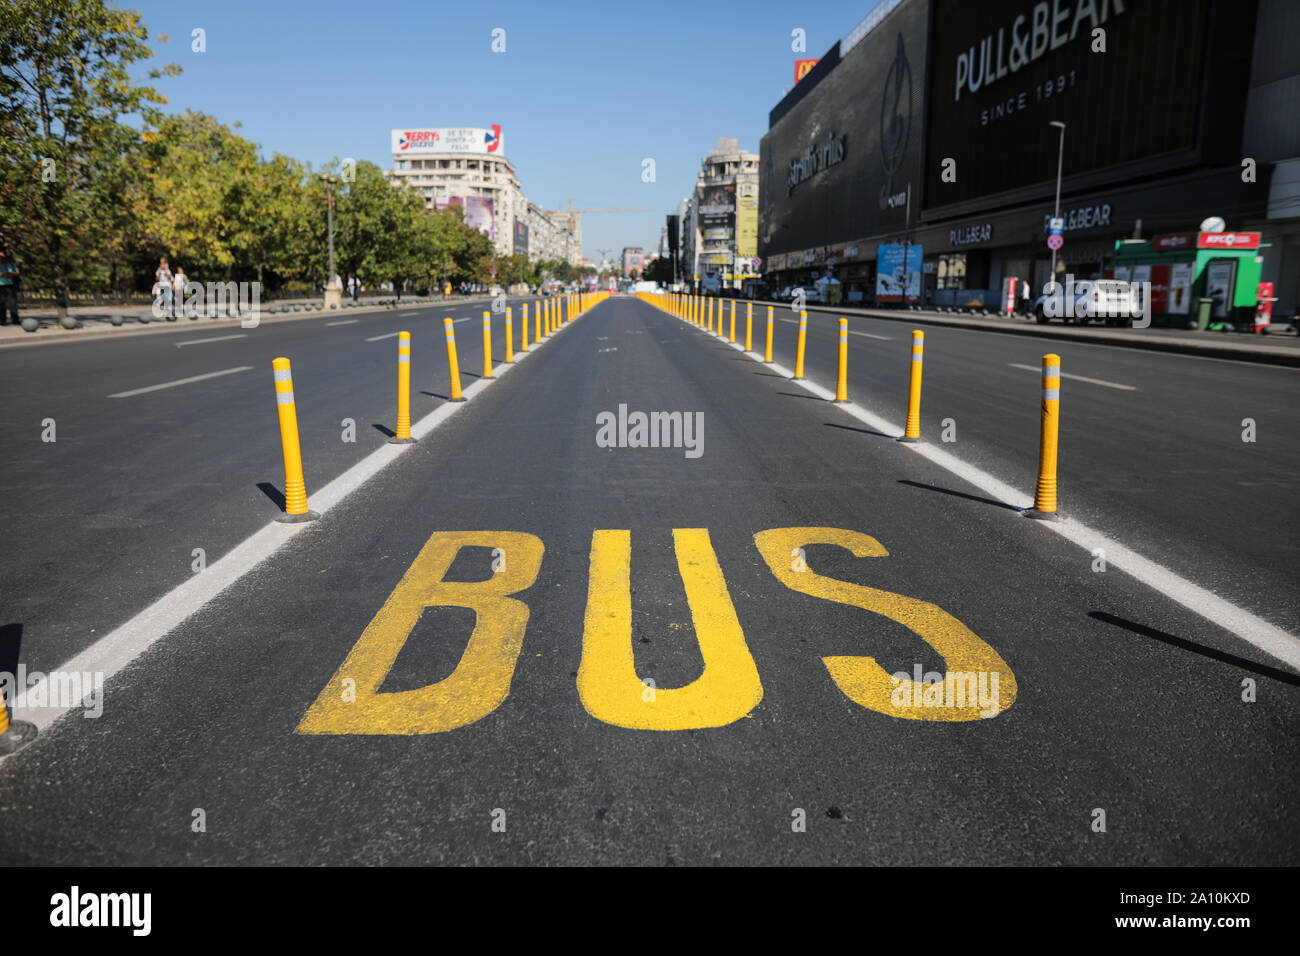 Bucharest, Romania - September 22, 2019: Bus special line in downtown Bucharest with no traffic around. Stock Photo